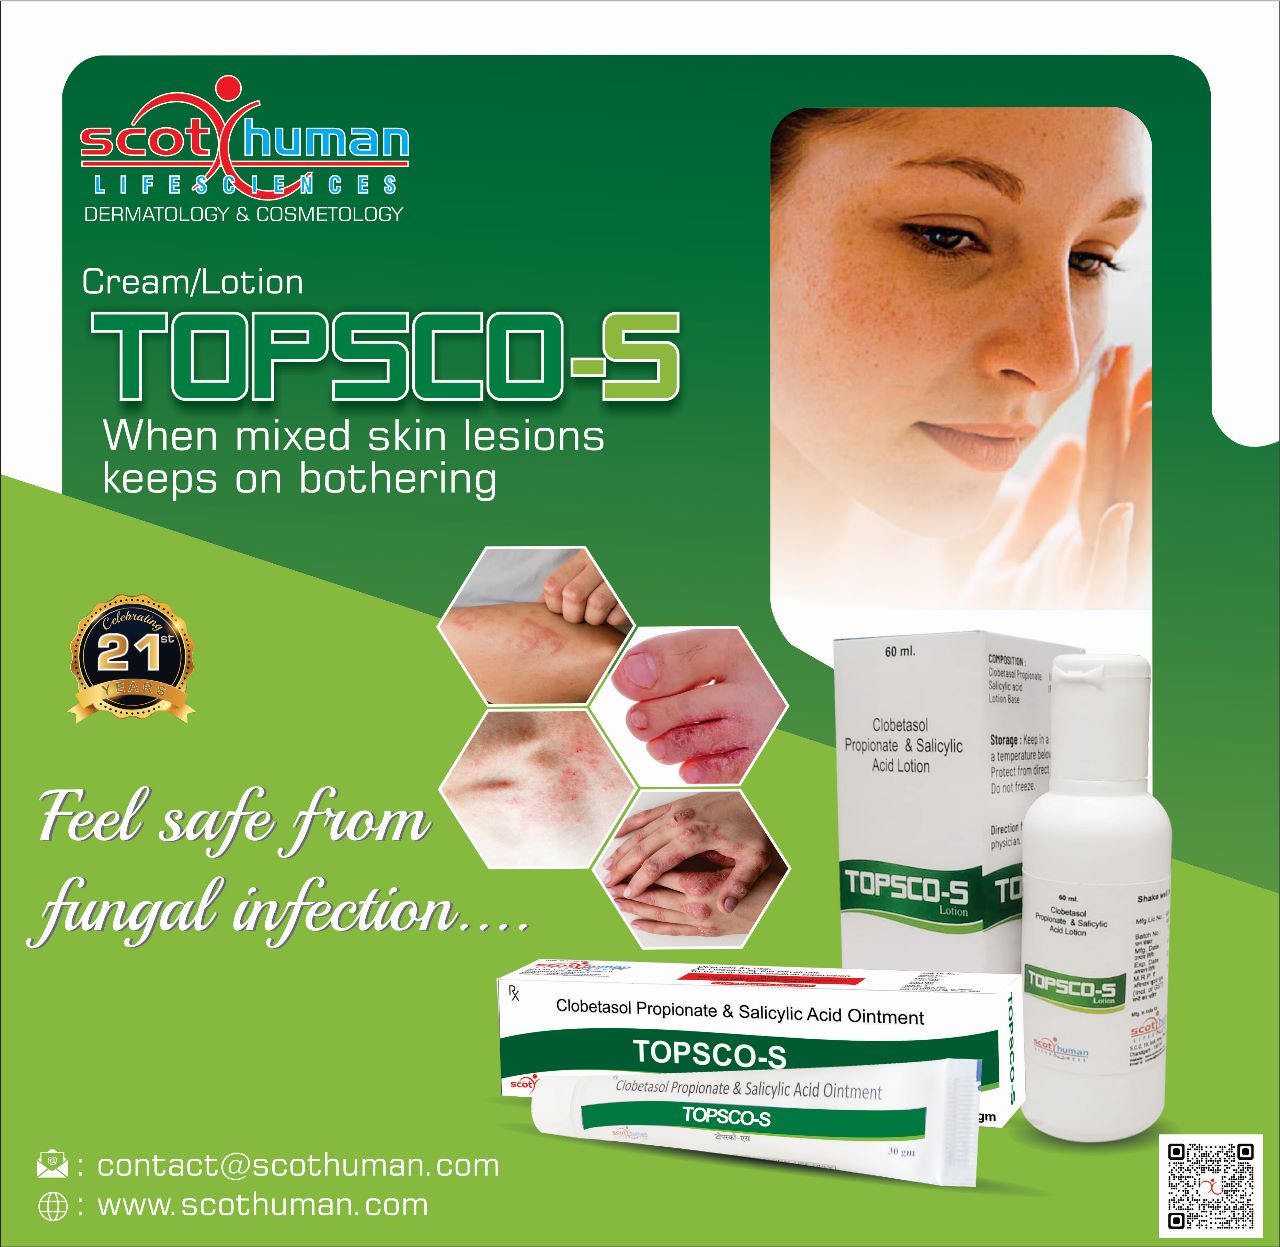 Product Name: TopSco S, Compositions of TopSco S are Clobestol propionate and Salicylic Acid Ointment - Pharma Drugs and Chemicals